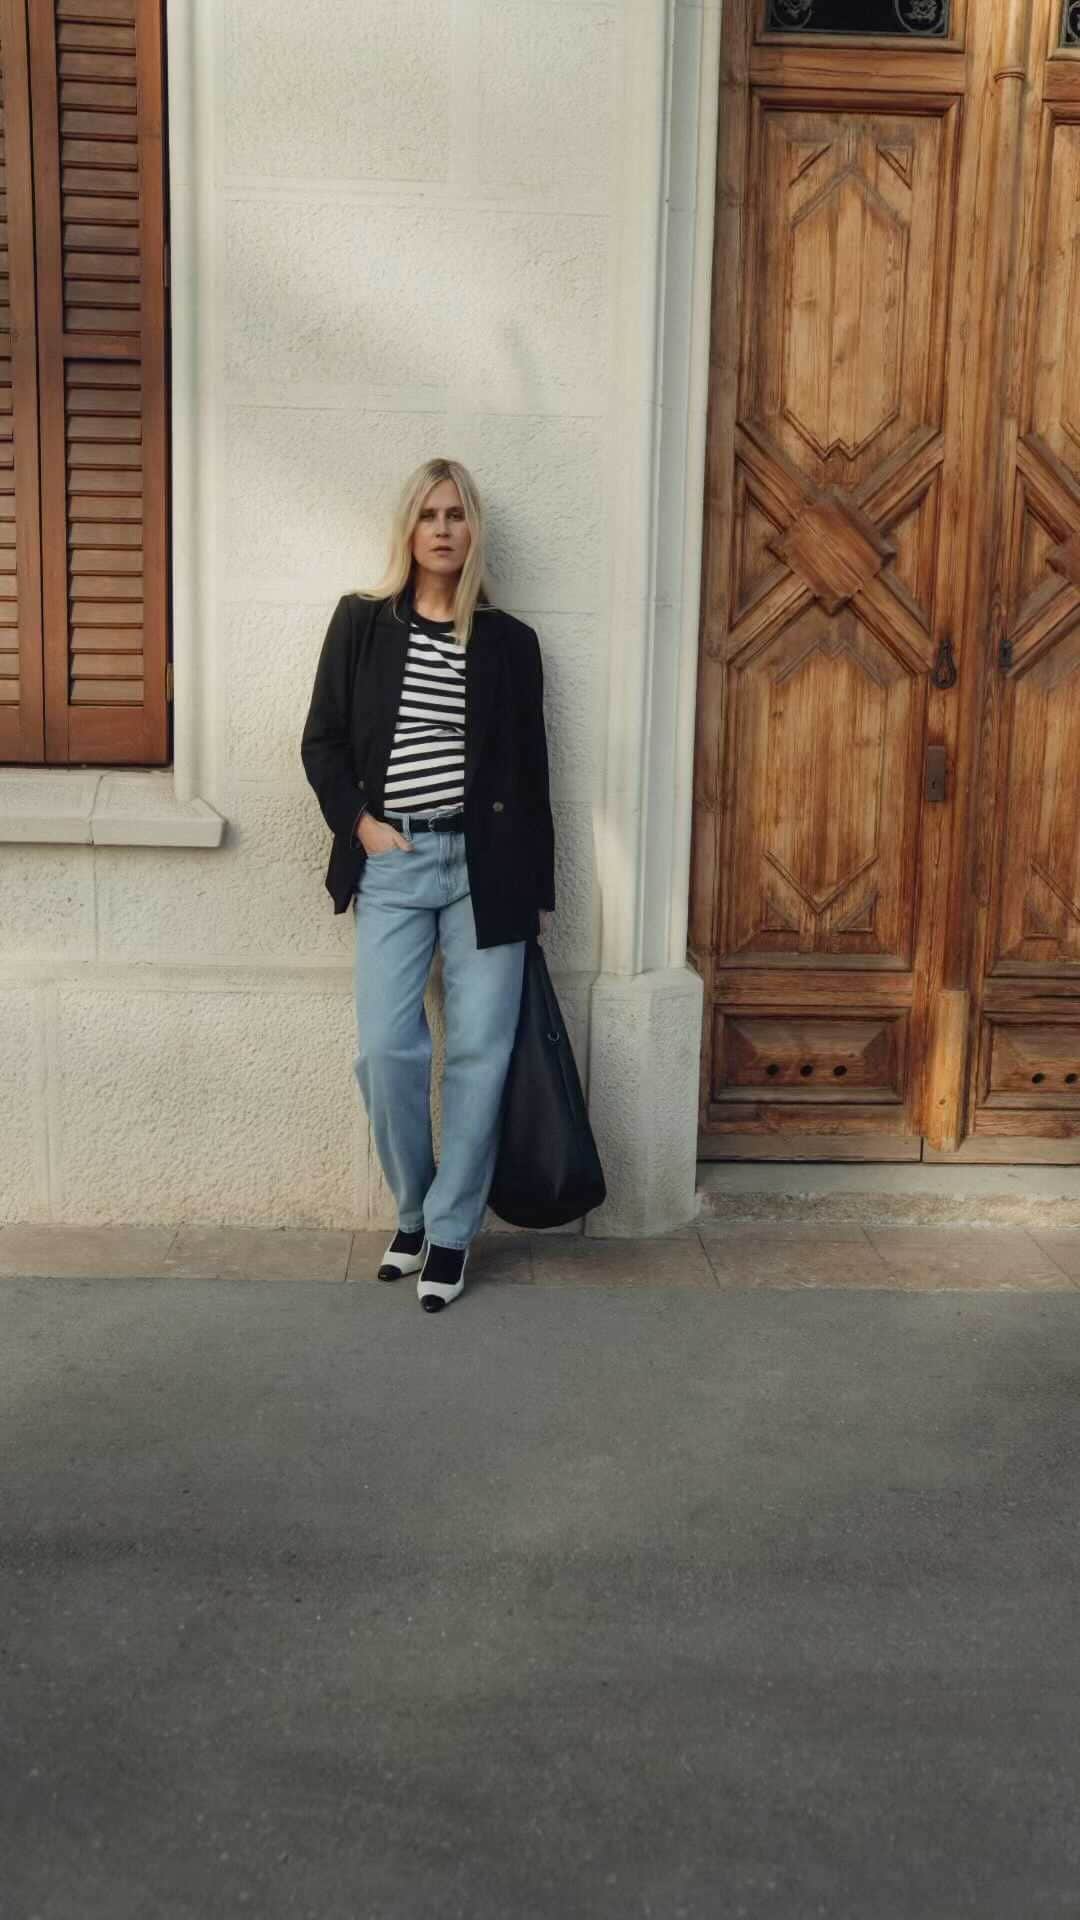 Linda Tolのインスタグラム：「My STYLED BY campaign in collaboration with @tomtailor_official launched today.   I had the pleasure to curate pieces from the AW23 collection to create trans-seasonal layered looks. The line is highly inspired by my own classic aesthetic with a sophisticated twist.  Get my curated maritime staples look at tom-tailor.de」